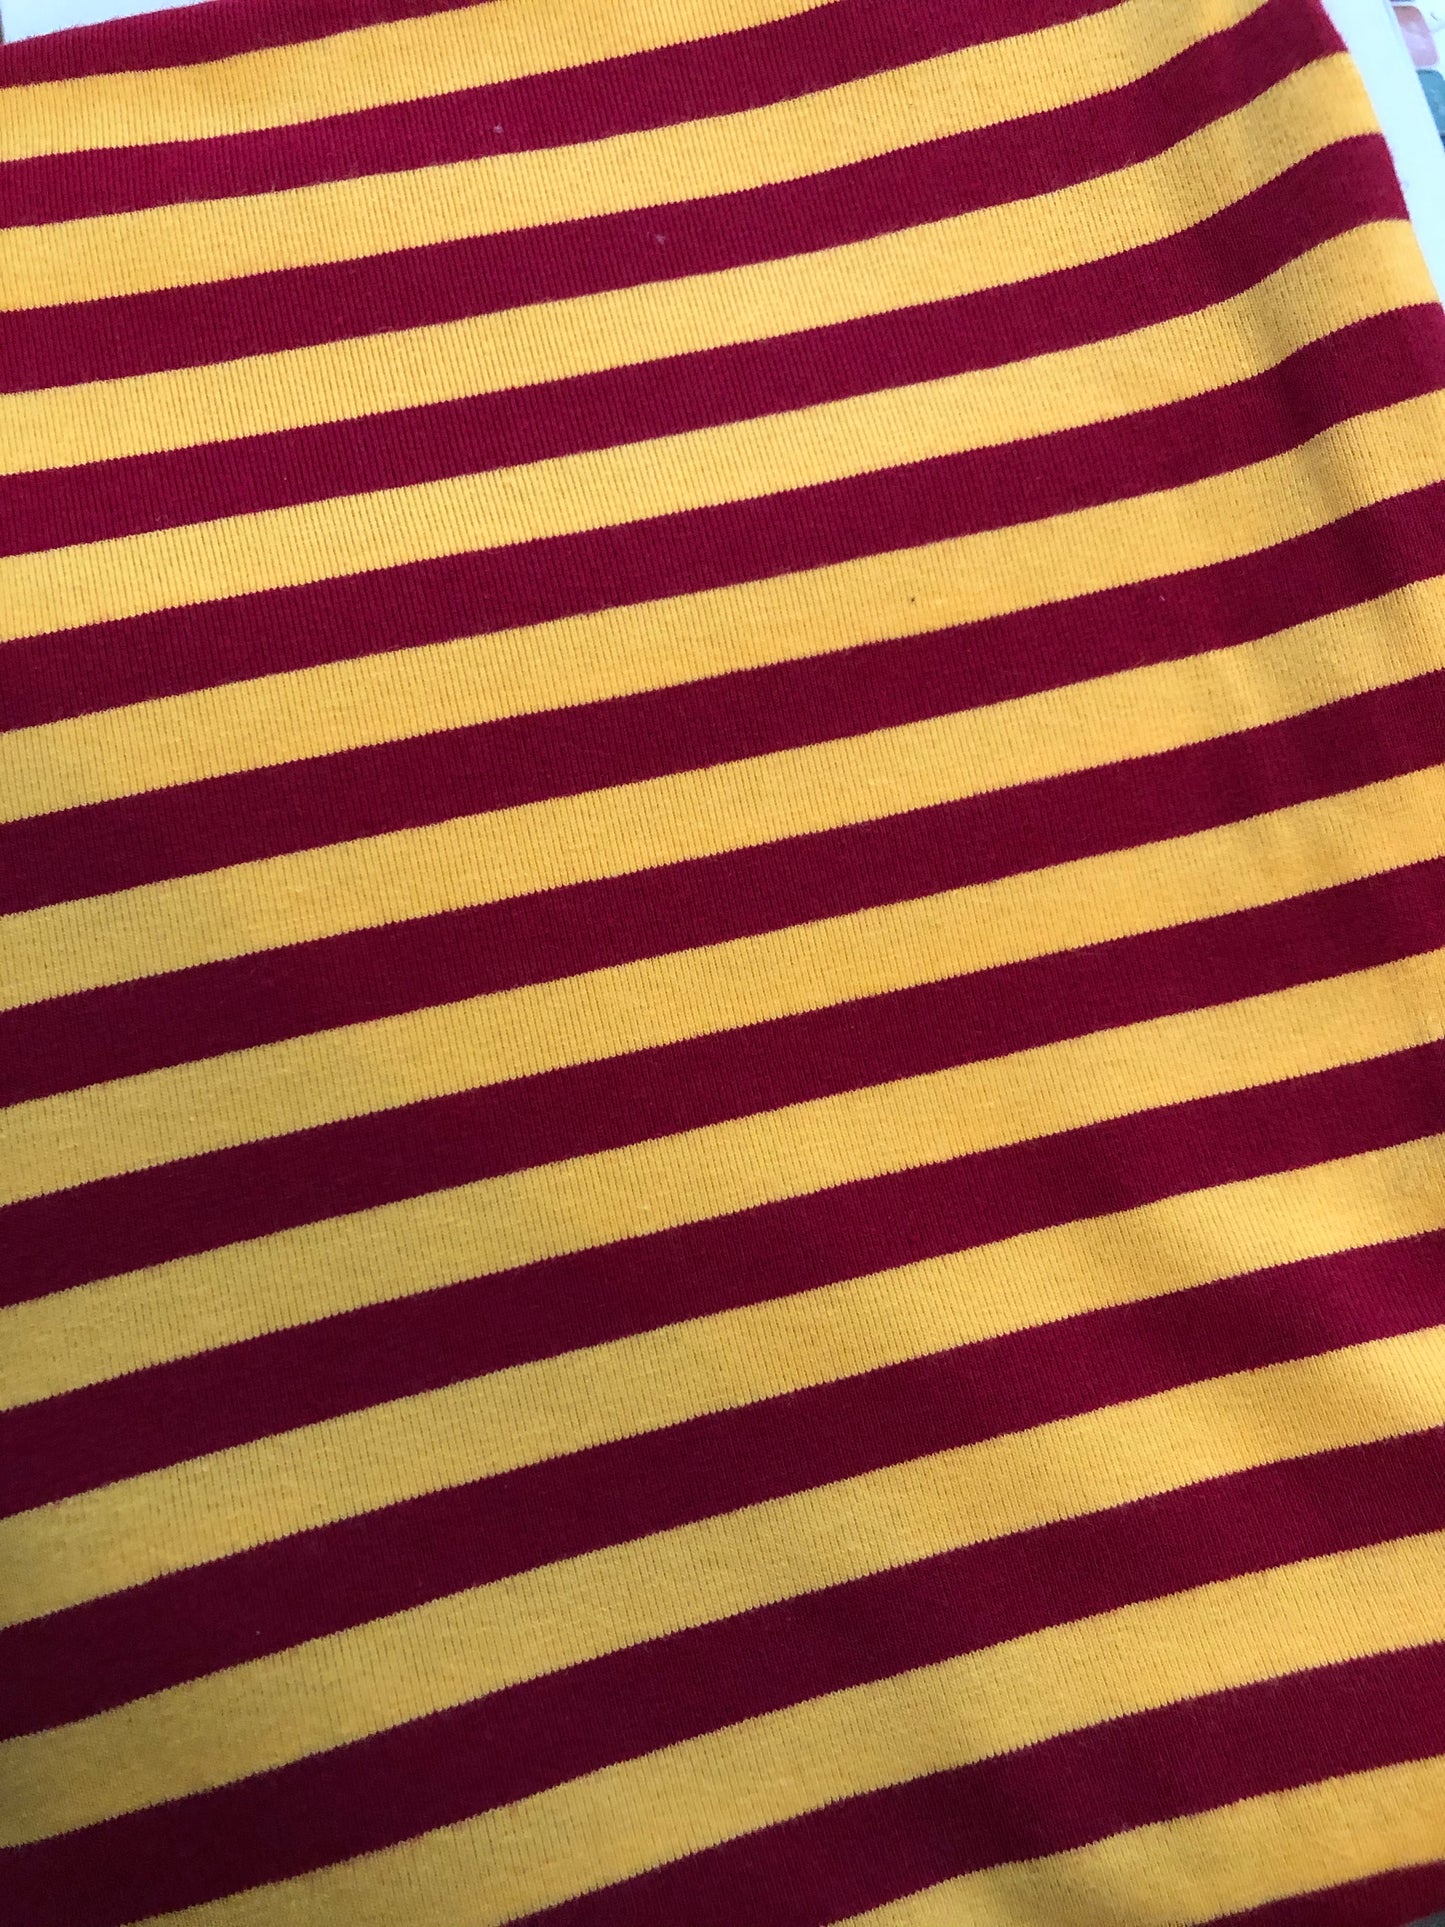 Maroon and Gold Stripe